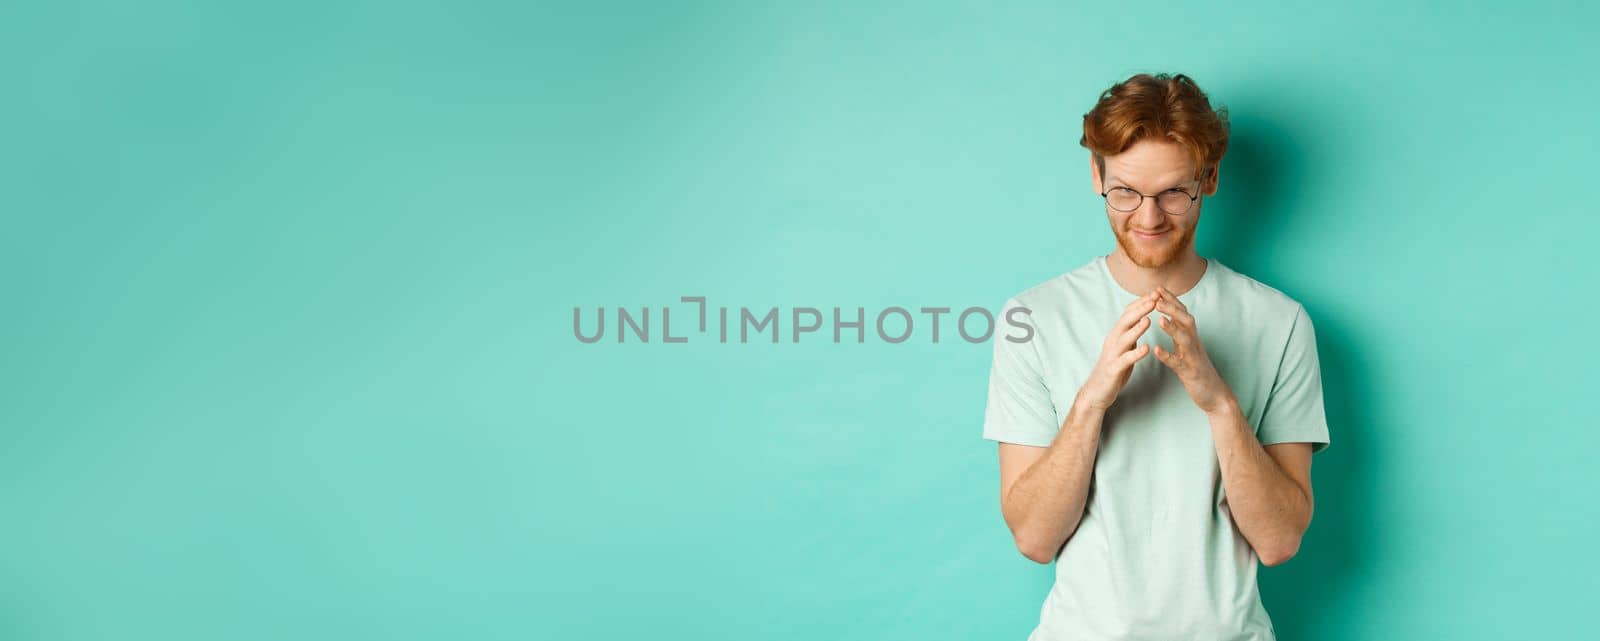 Devious redhead man in glasses and t-shirt pitching an idea, steeple fingers and look from under forehead with sly and smug smile, standing over mint background.